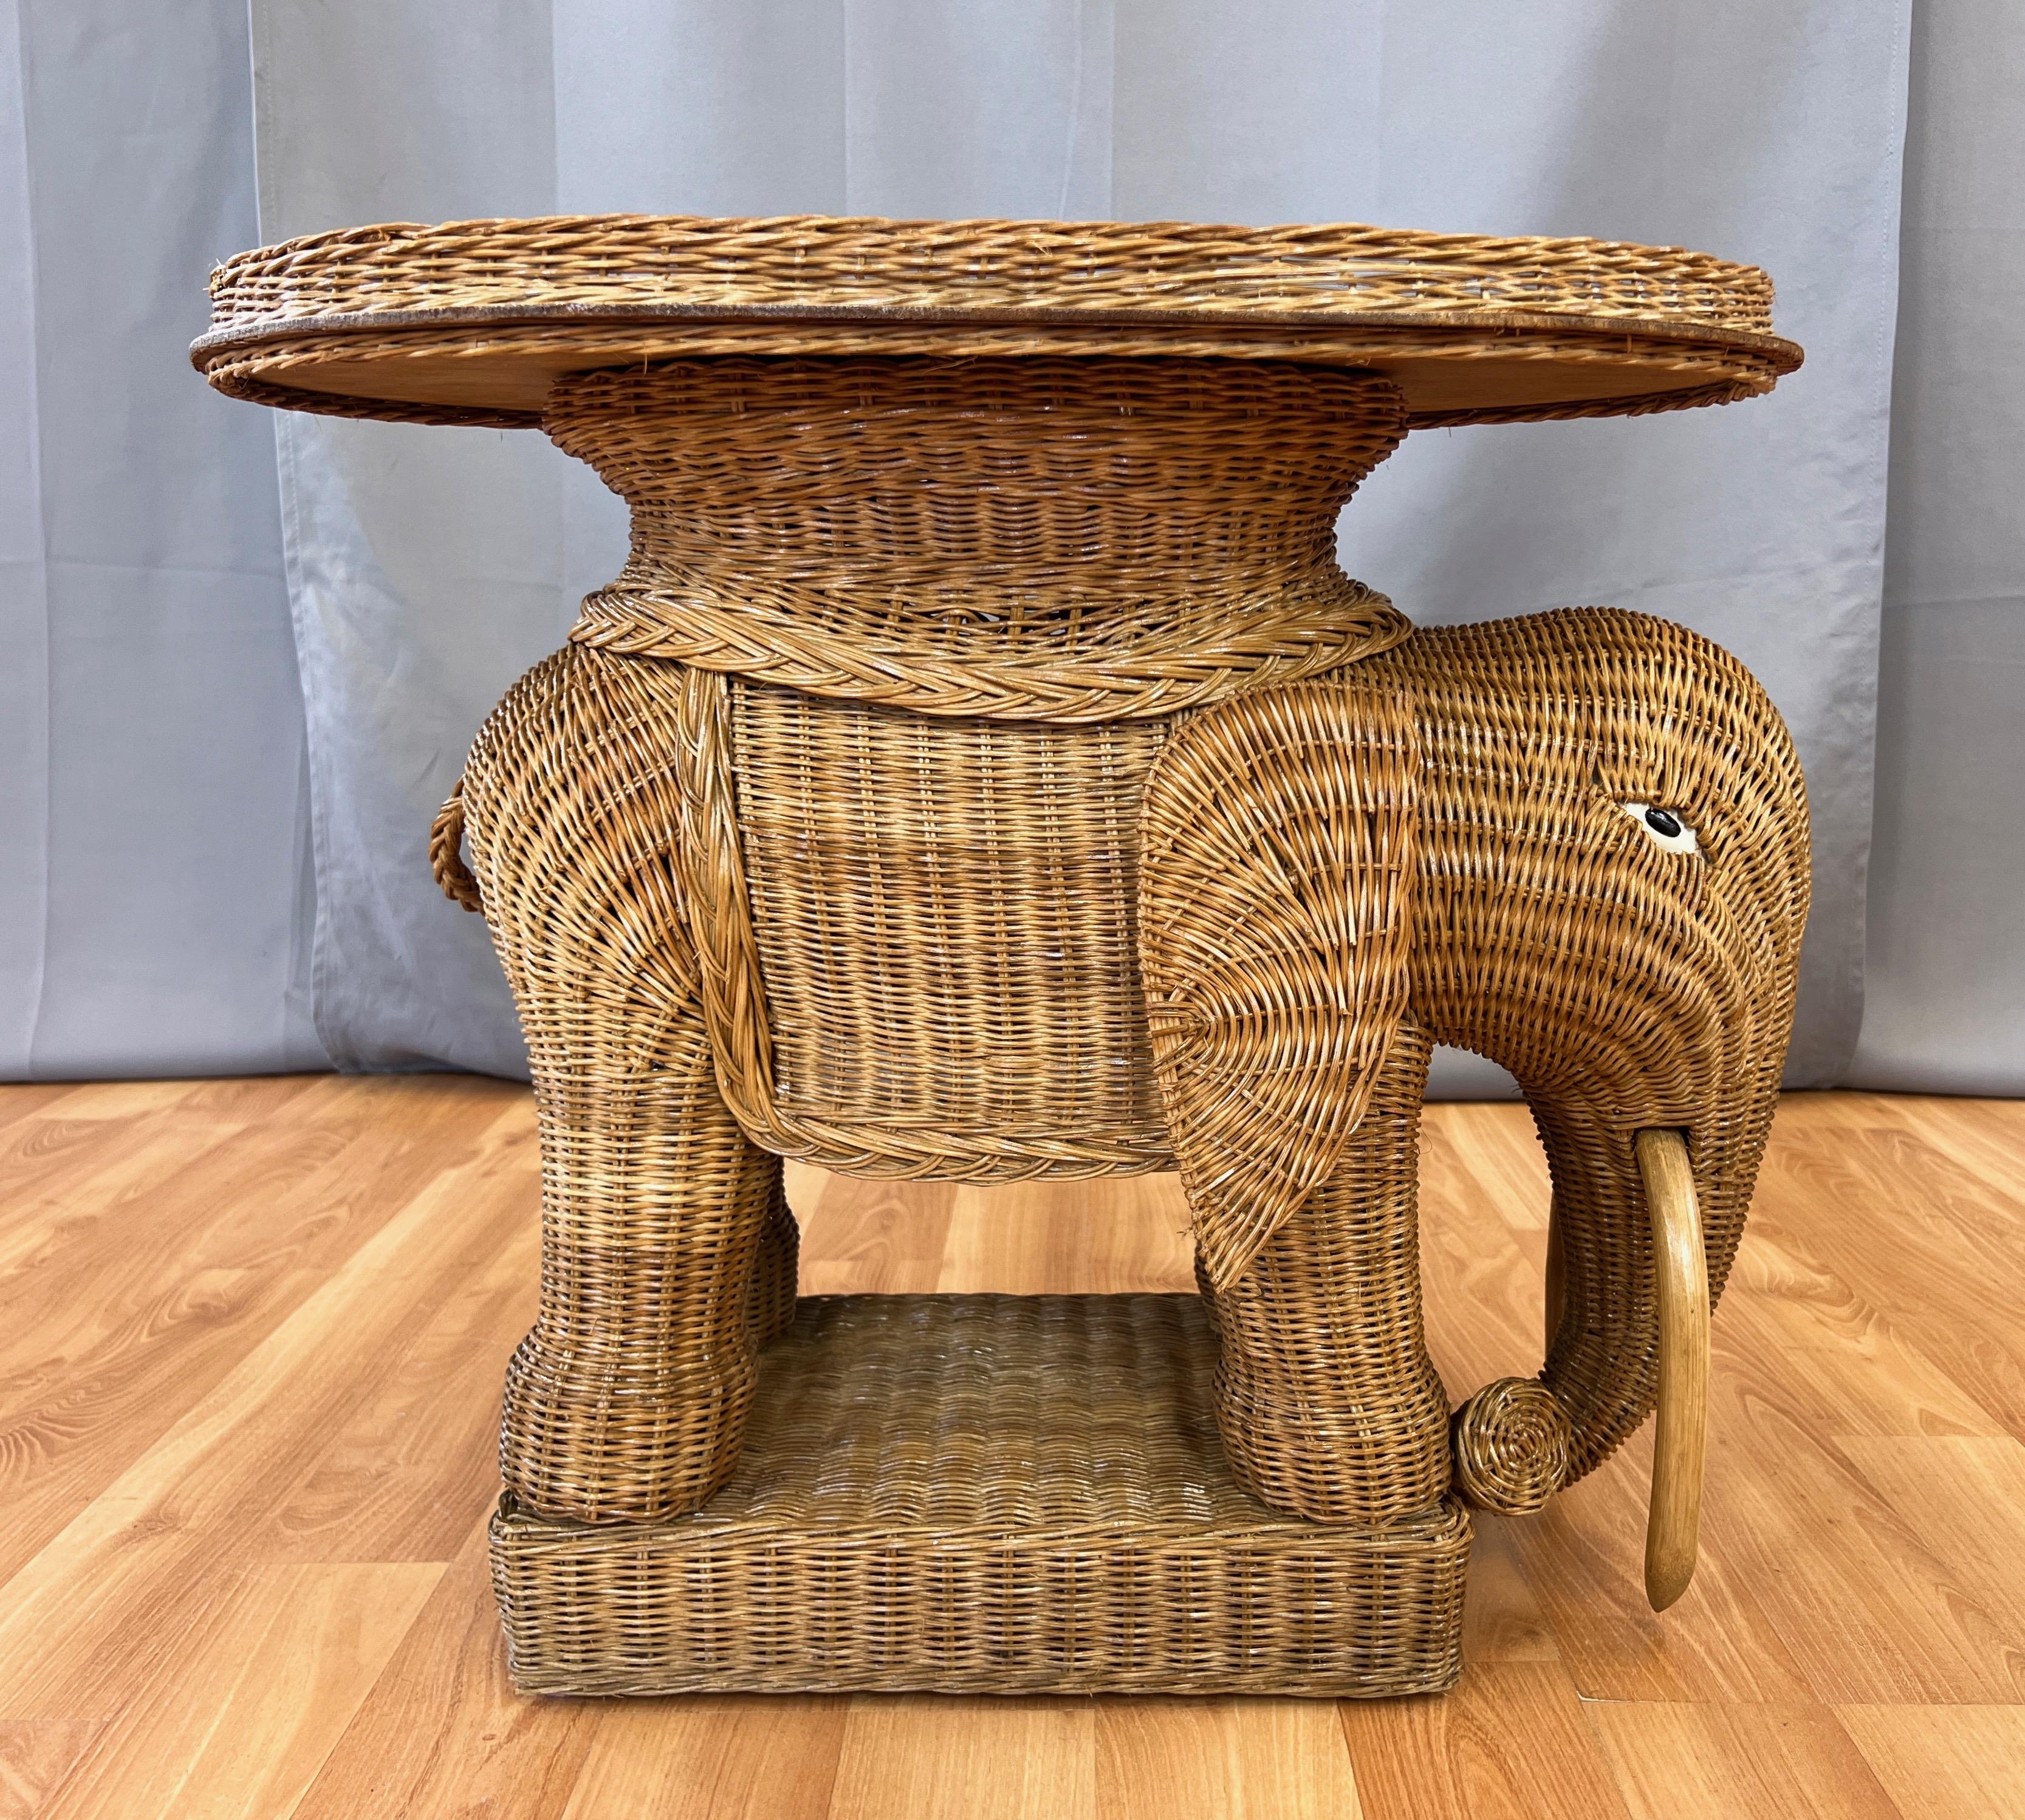 A circa 1970s natural wicker and rattan elephant side table with removable serving tray.

Finely crafted Bohemian chic at its most charming and timeless, with an artfully hand-woven natural wicker form accented by painted eyes and bent rattan tusks.